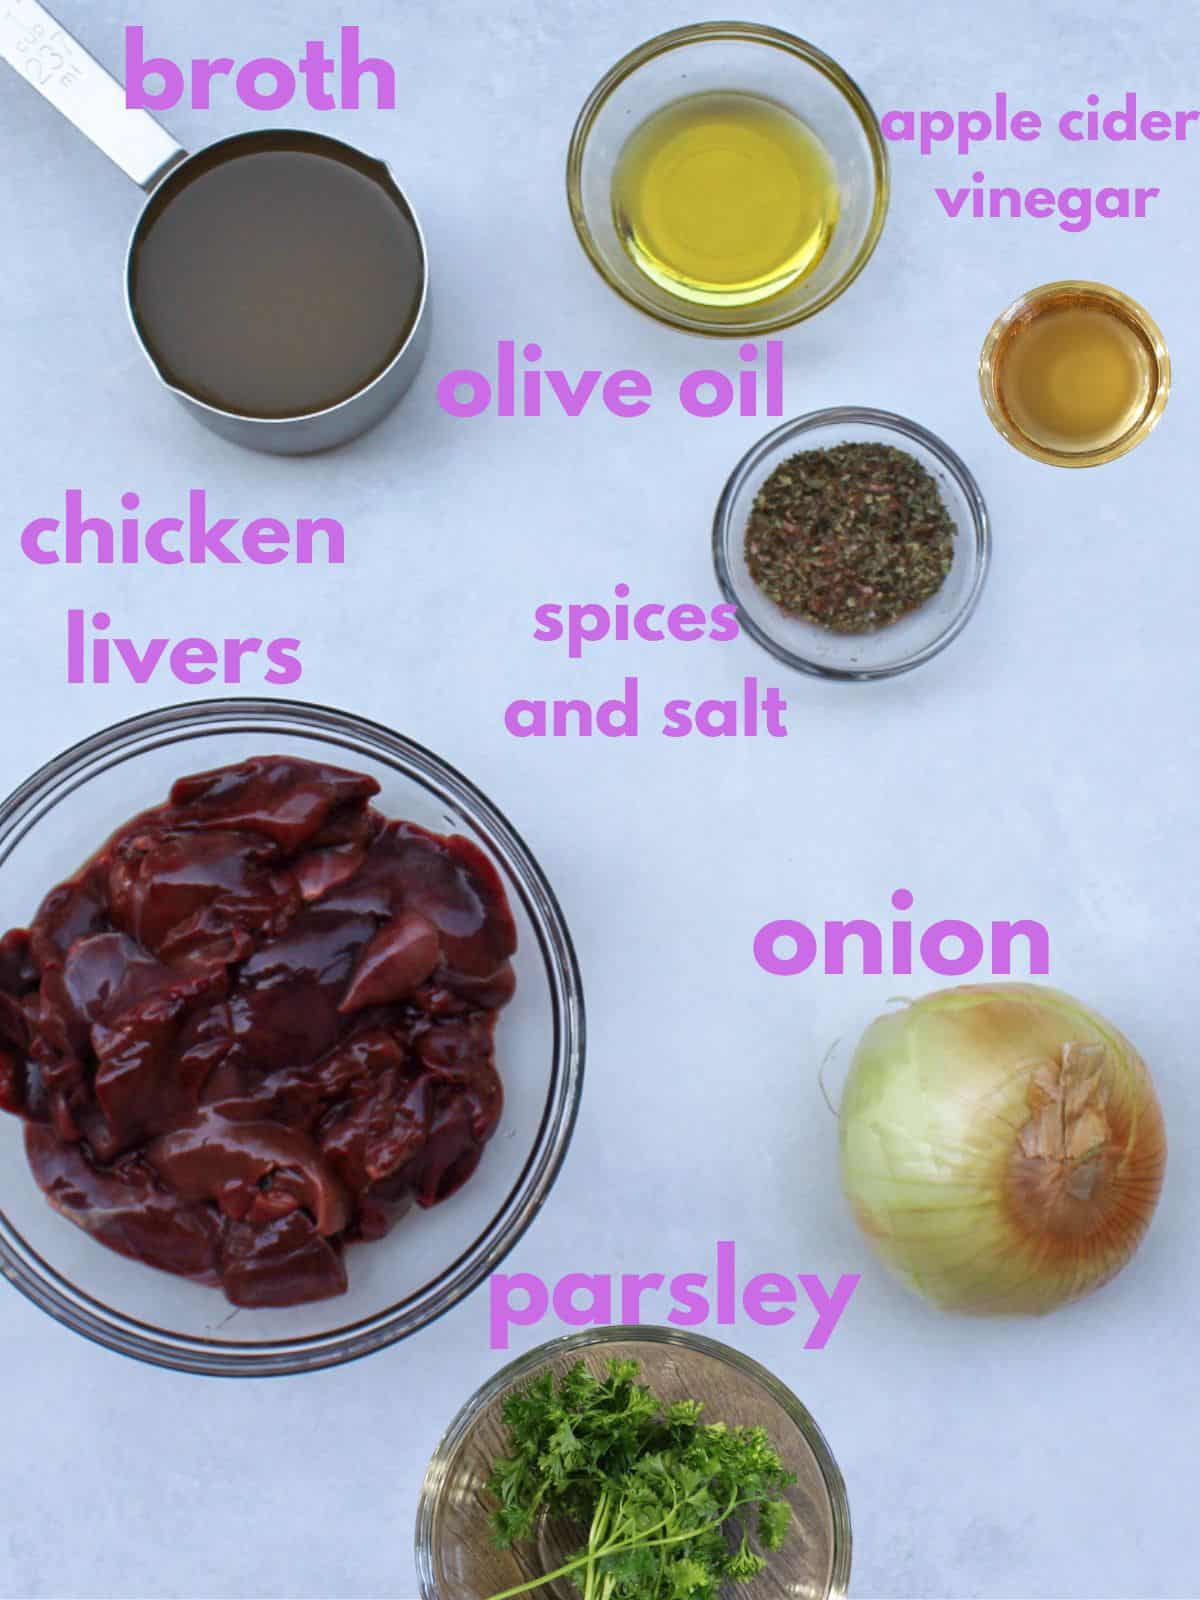 Image of all ingredients to make this chicken liver stew. All the ingrdients on the image are labeled. 